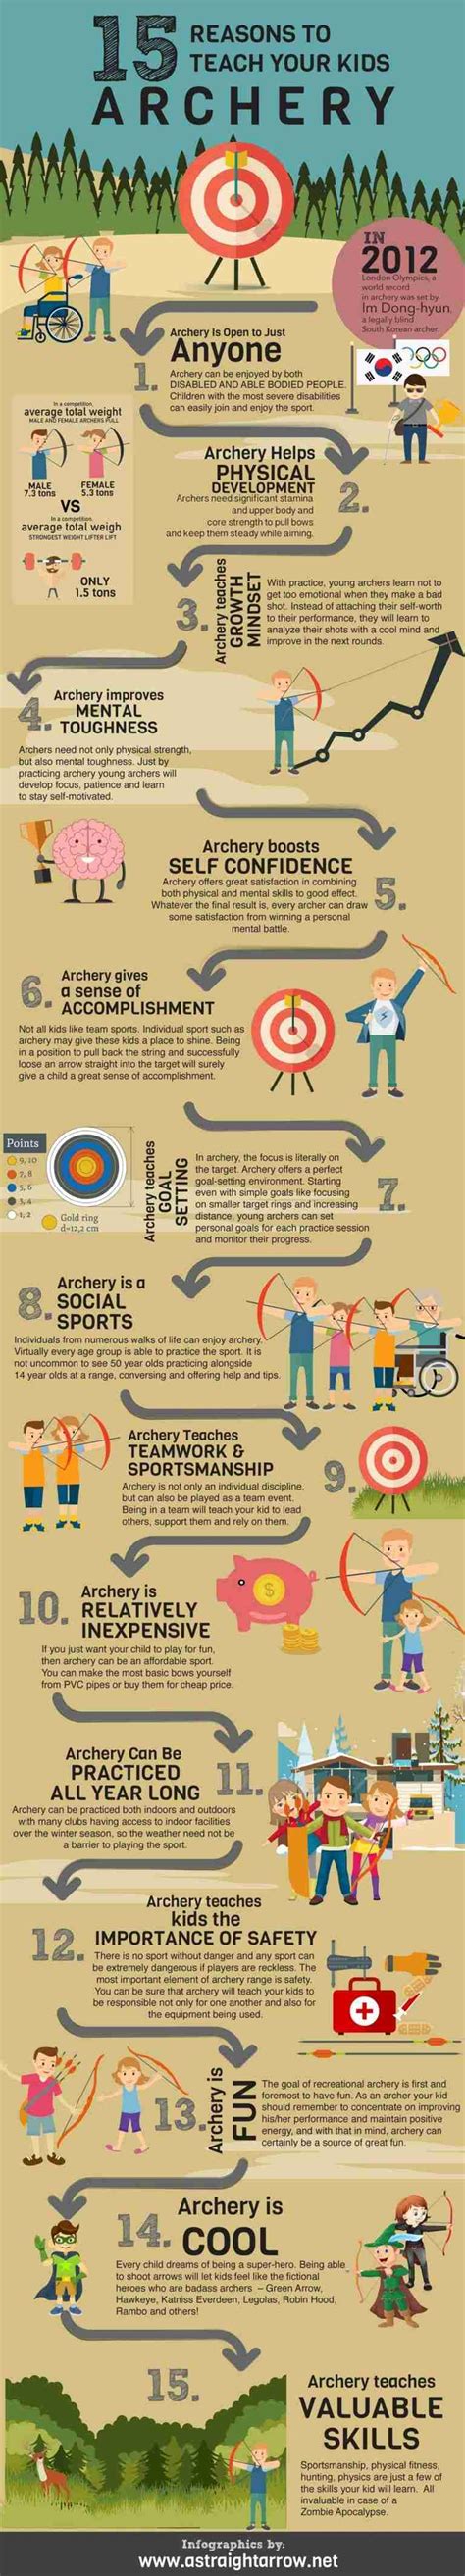 15 Reasons To Teach Your Kids Archery